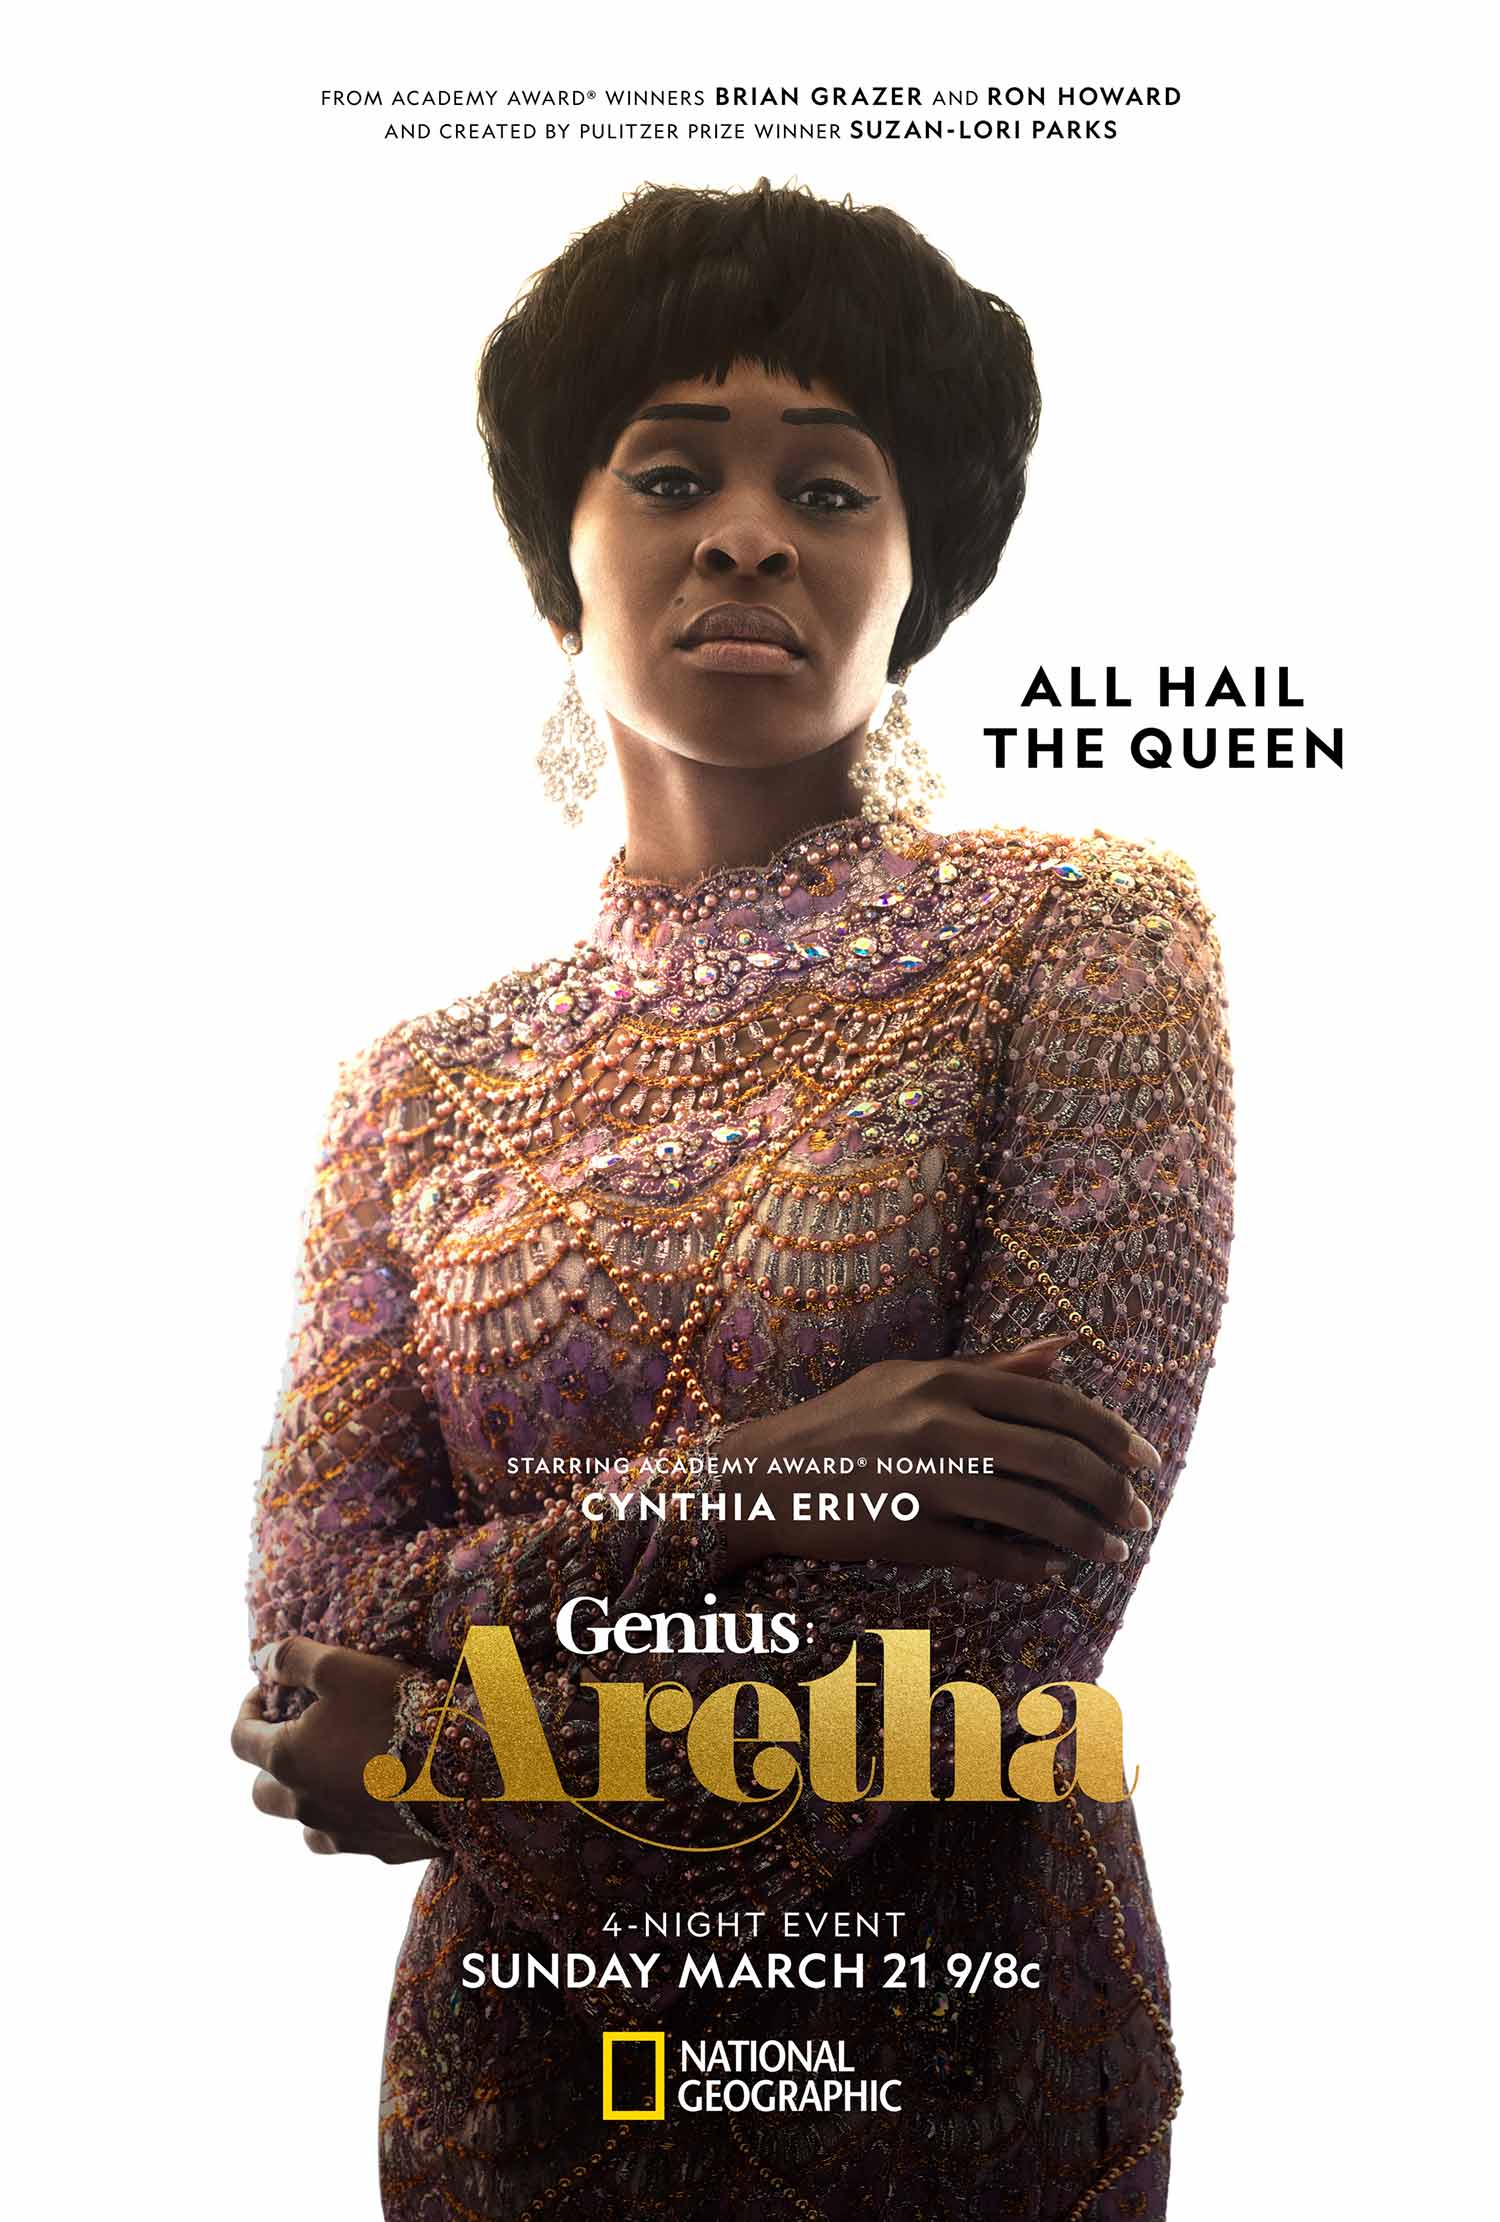 Promotional poster for Genius: Aretha featuring Cynthia Erivo